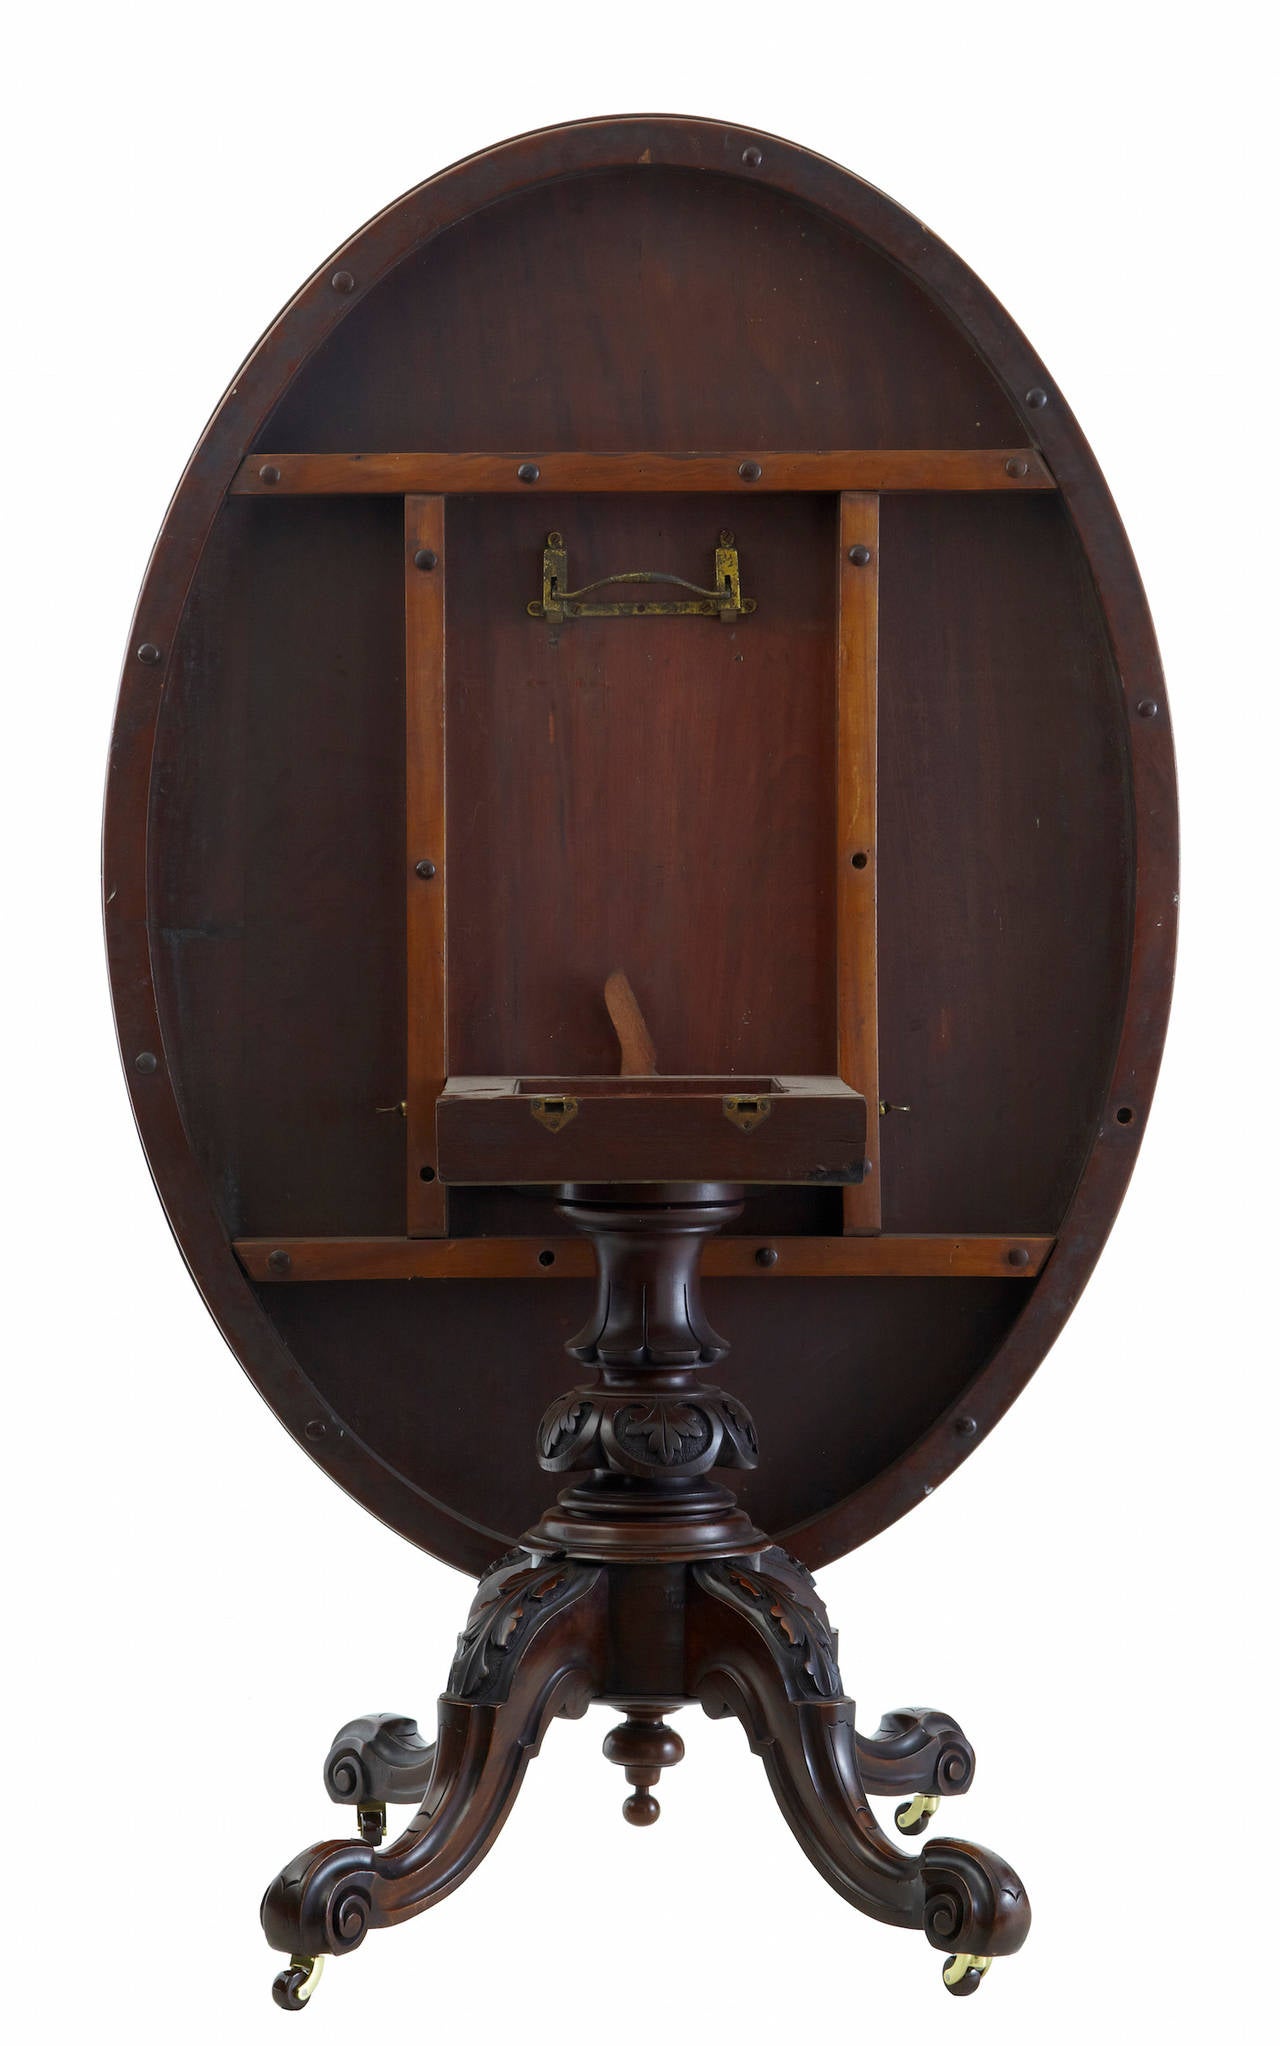 Oval tilt top loo table circa 1880.
Walnut oval top, with tilting ability and brake.  Standing on a carved central stem quadriform base.
Replaced castors.

HEIGHT: 29 3/4